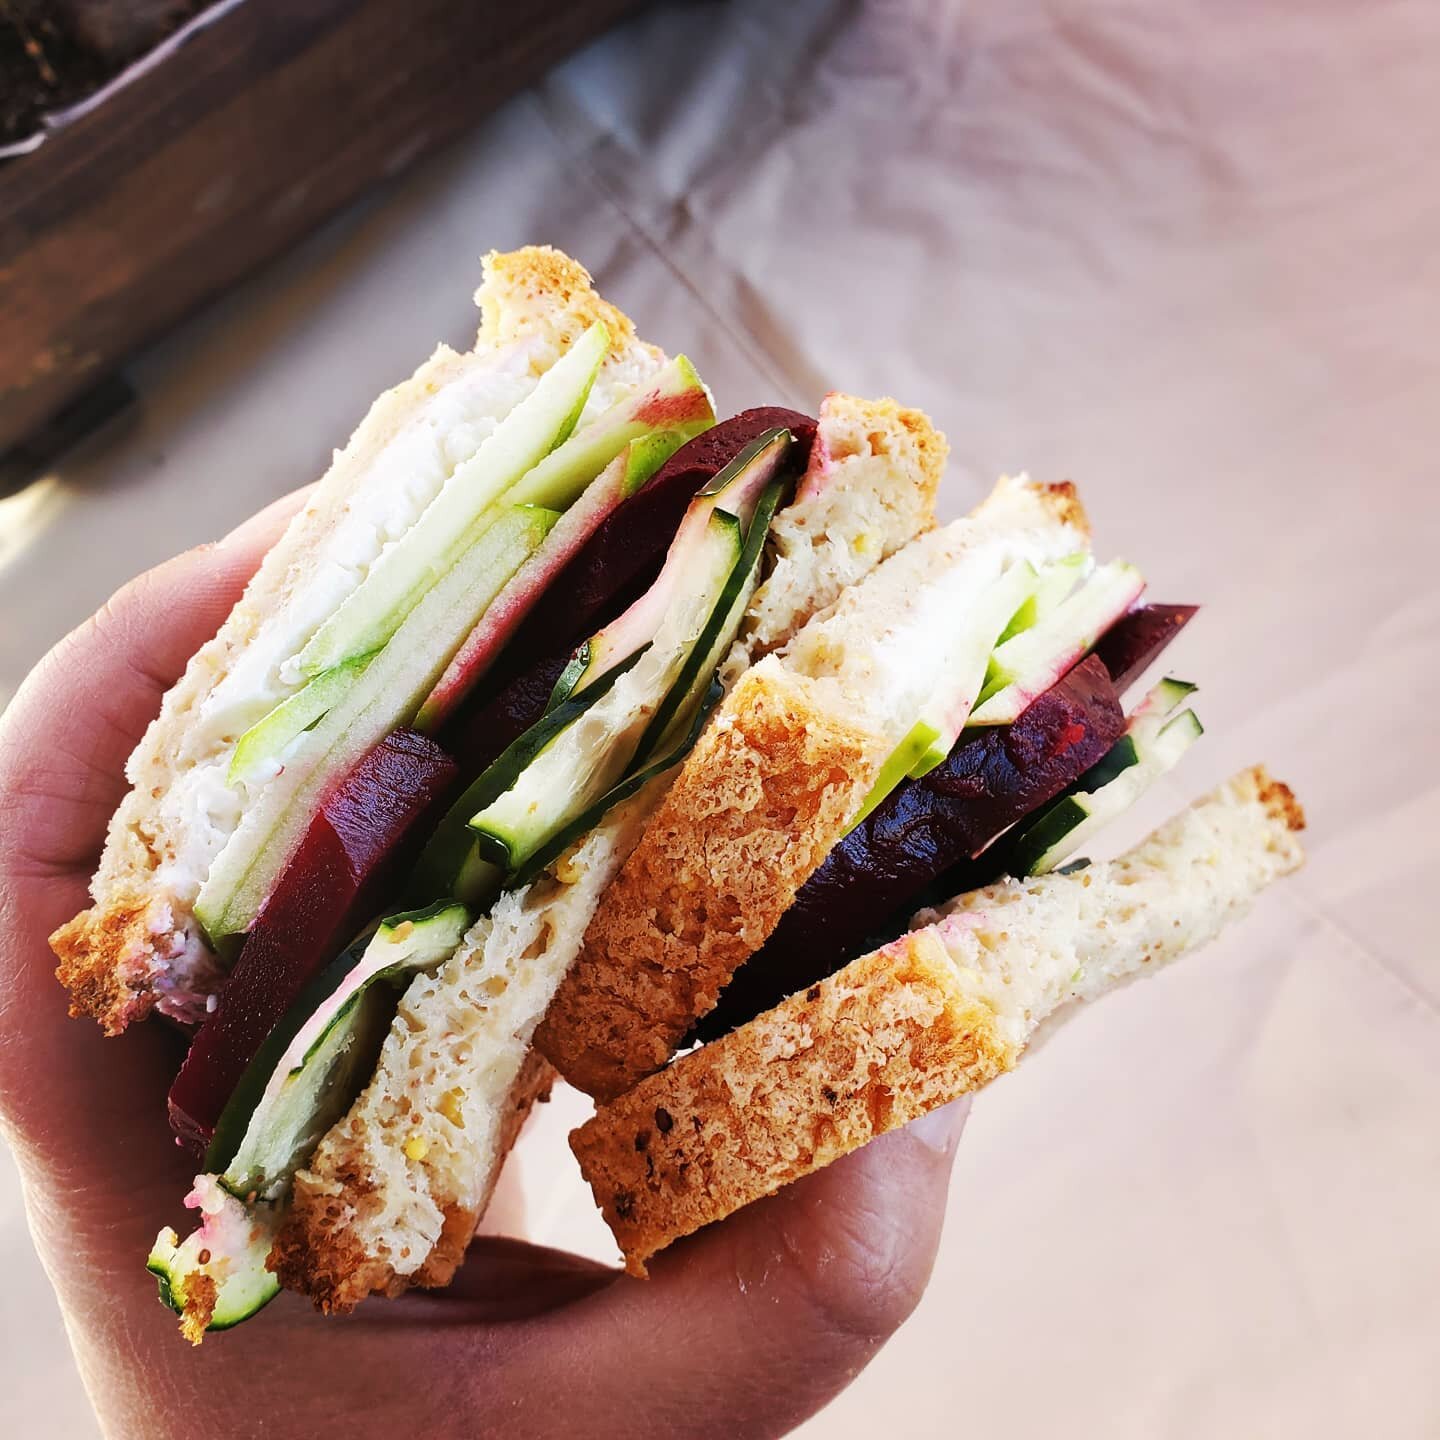 This post is for the 66% of people who said they loved beets in my recent social media poll 😉😁

Goat cheese and beetroot sandwich 🥪

Franz 7 grain gluten-free bread🍞
Goat cheese, spreadable🐐
Beets, sliced
Cucumbers, thinly sliced🥒
Granny smith 